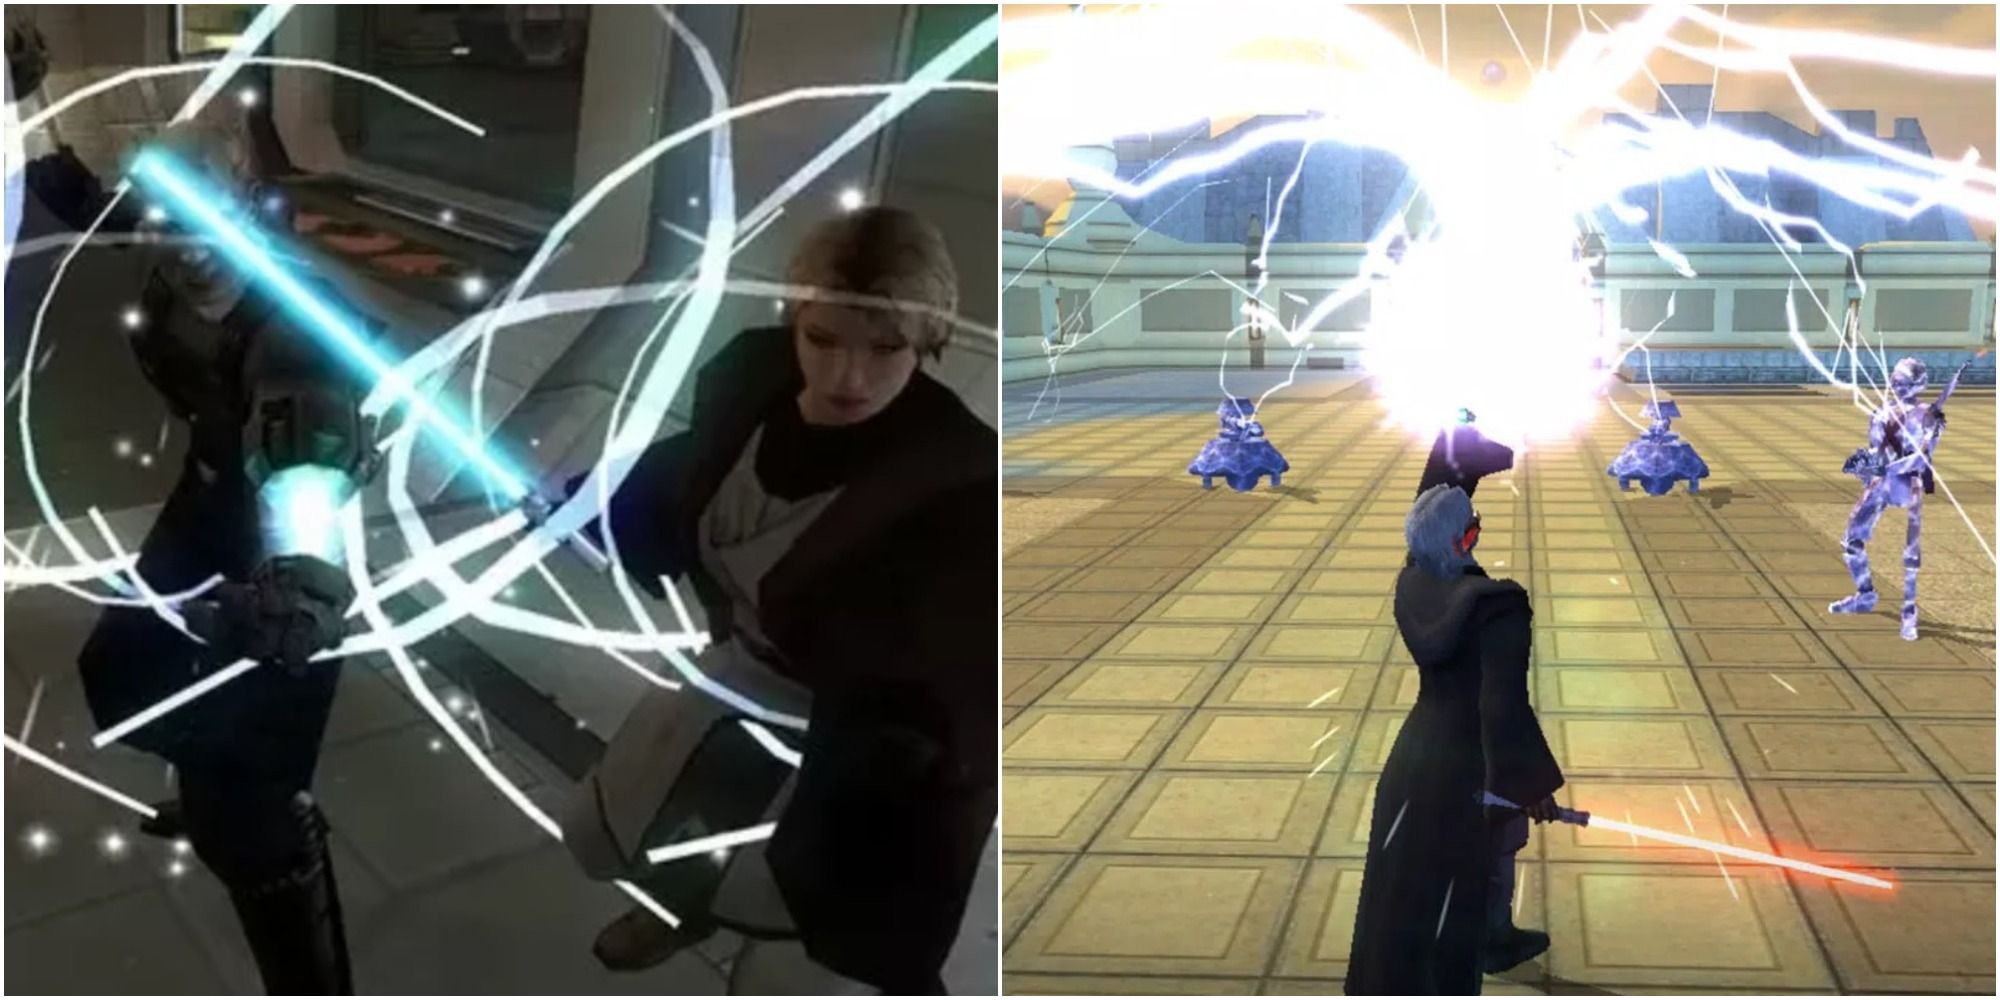 The female Exile from KOTOR healing party on the left. The male Exile uses Force Storm on a group of droids to the right.